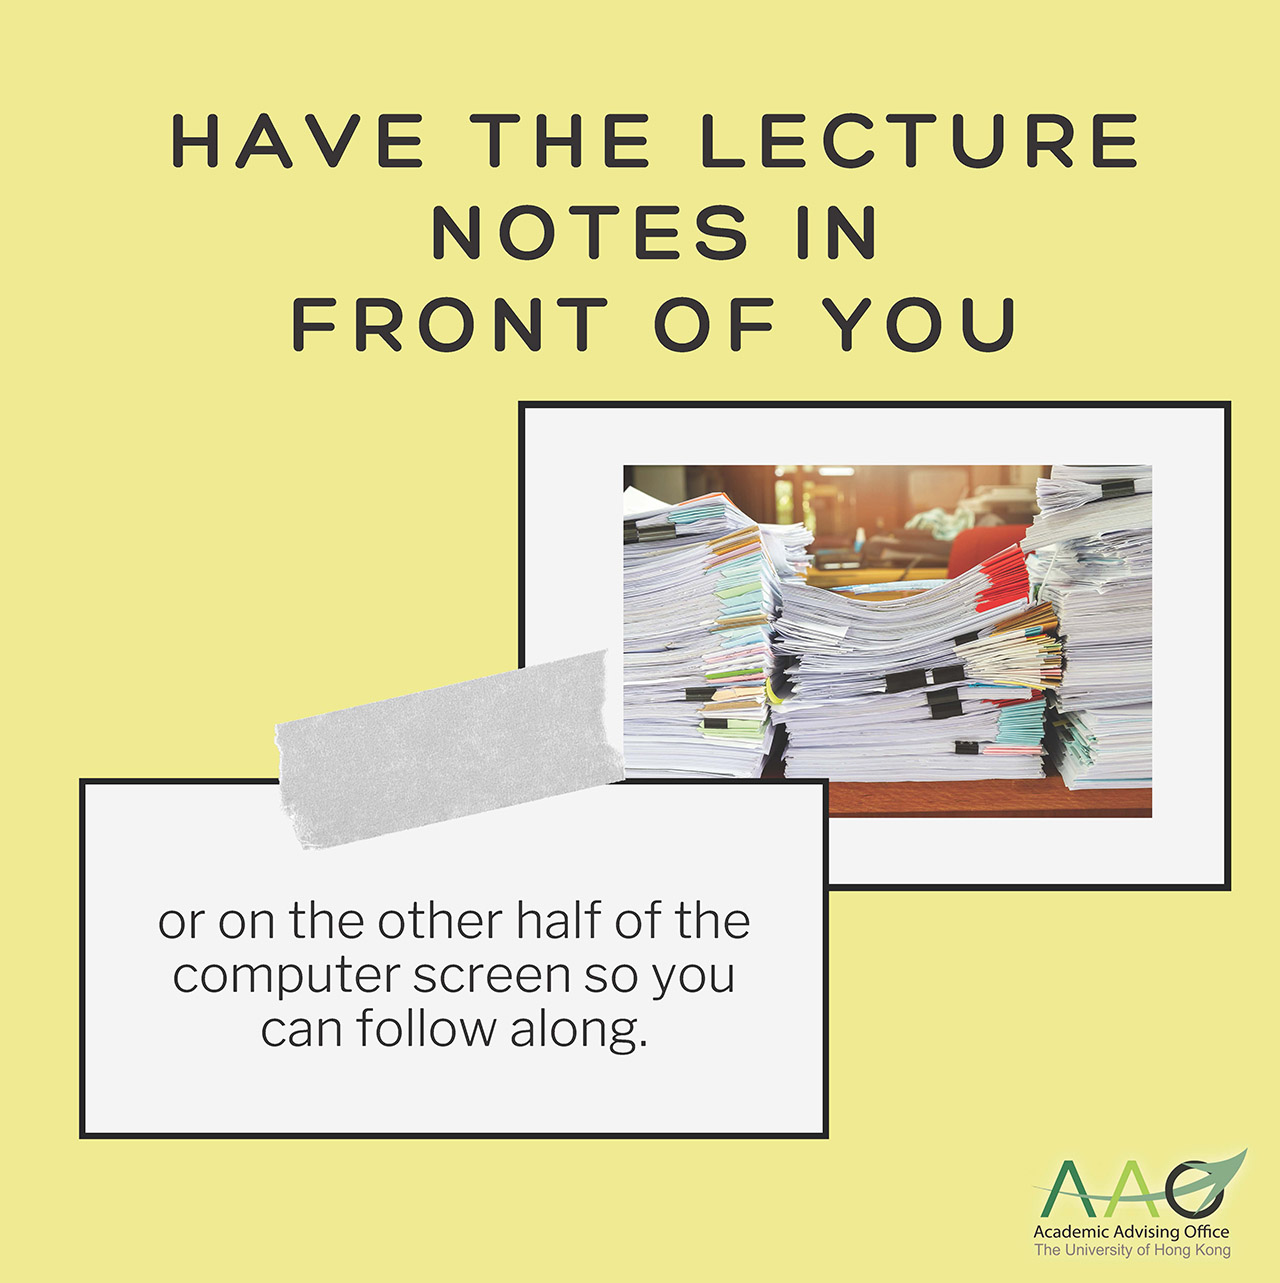 Have the lecture notes in front of you or on the other half of the computer screen so you can follow along.